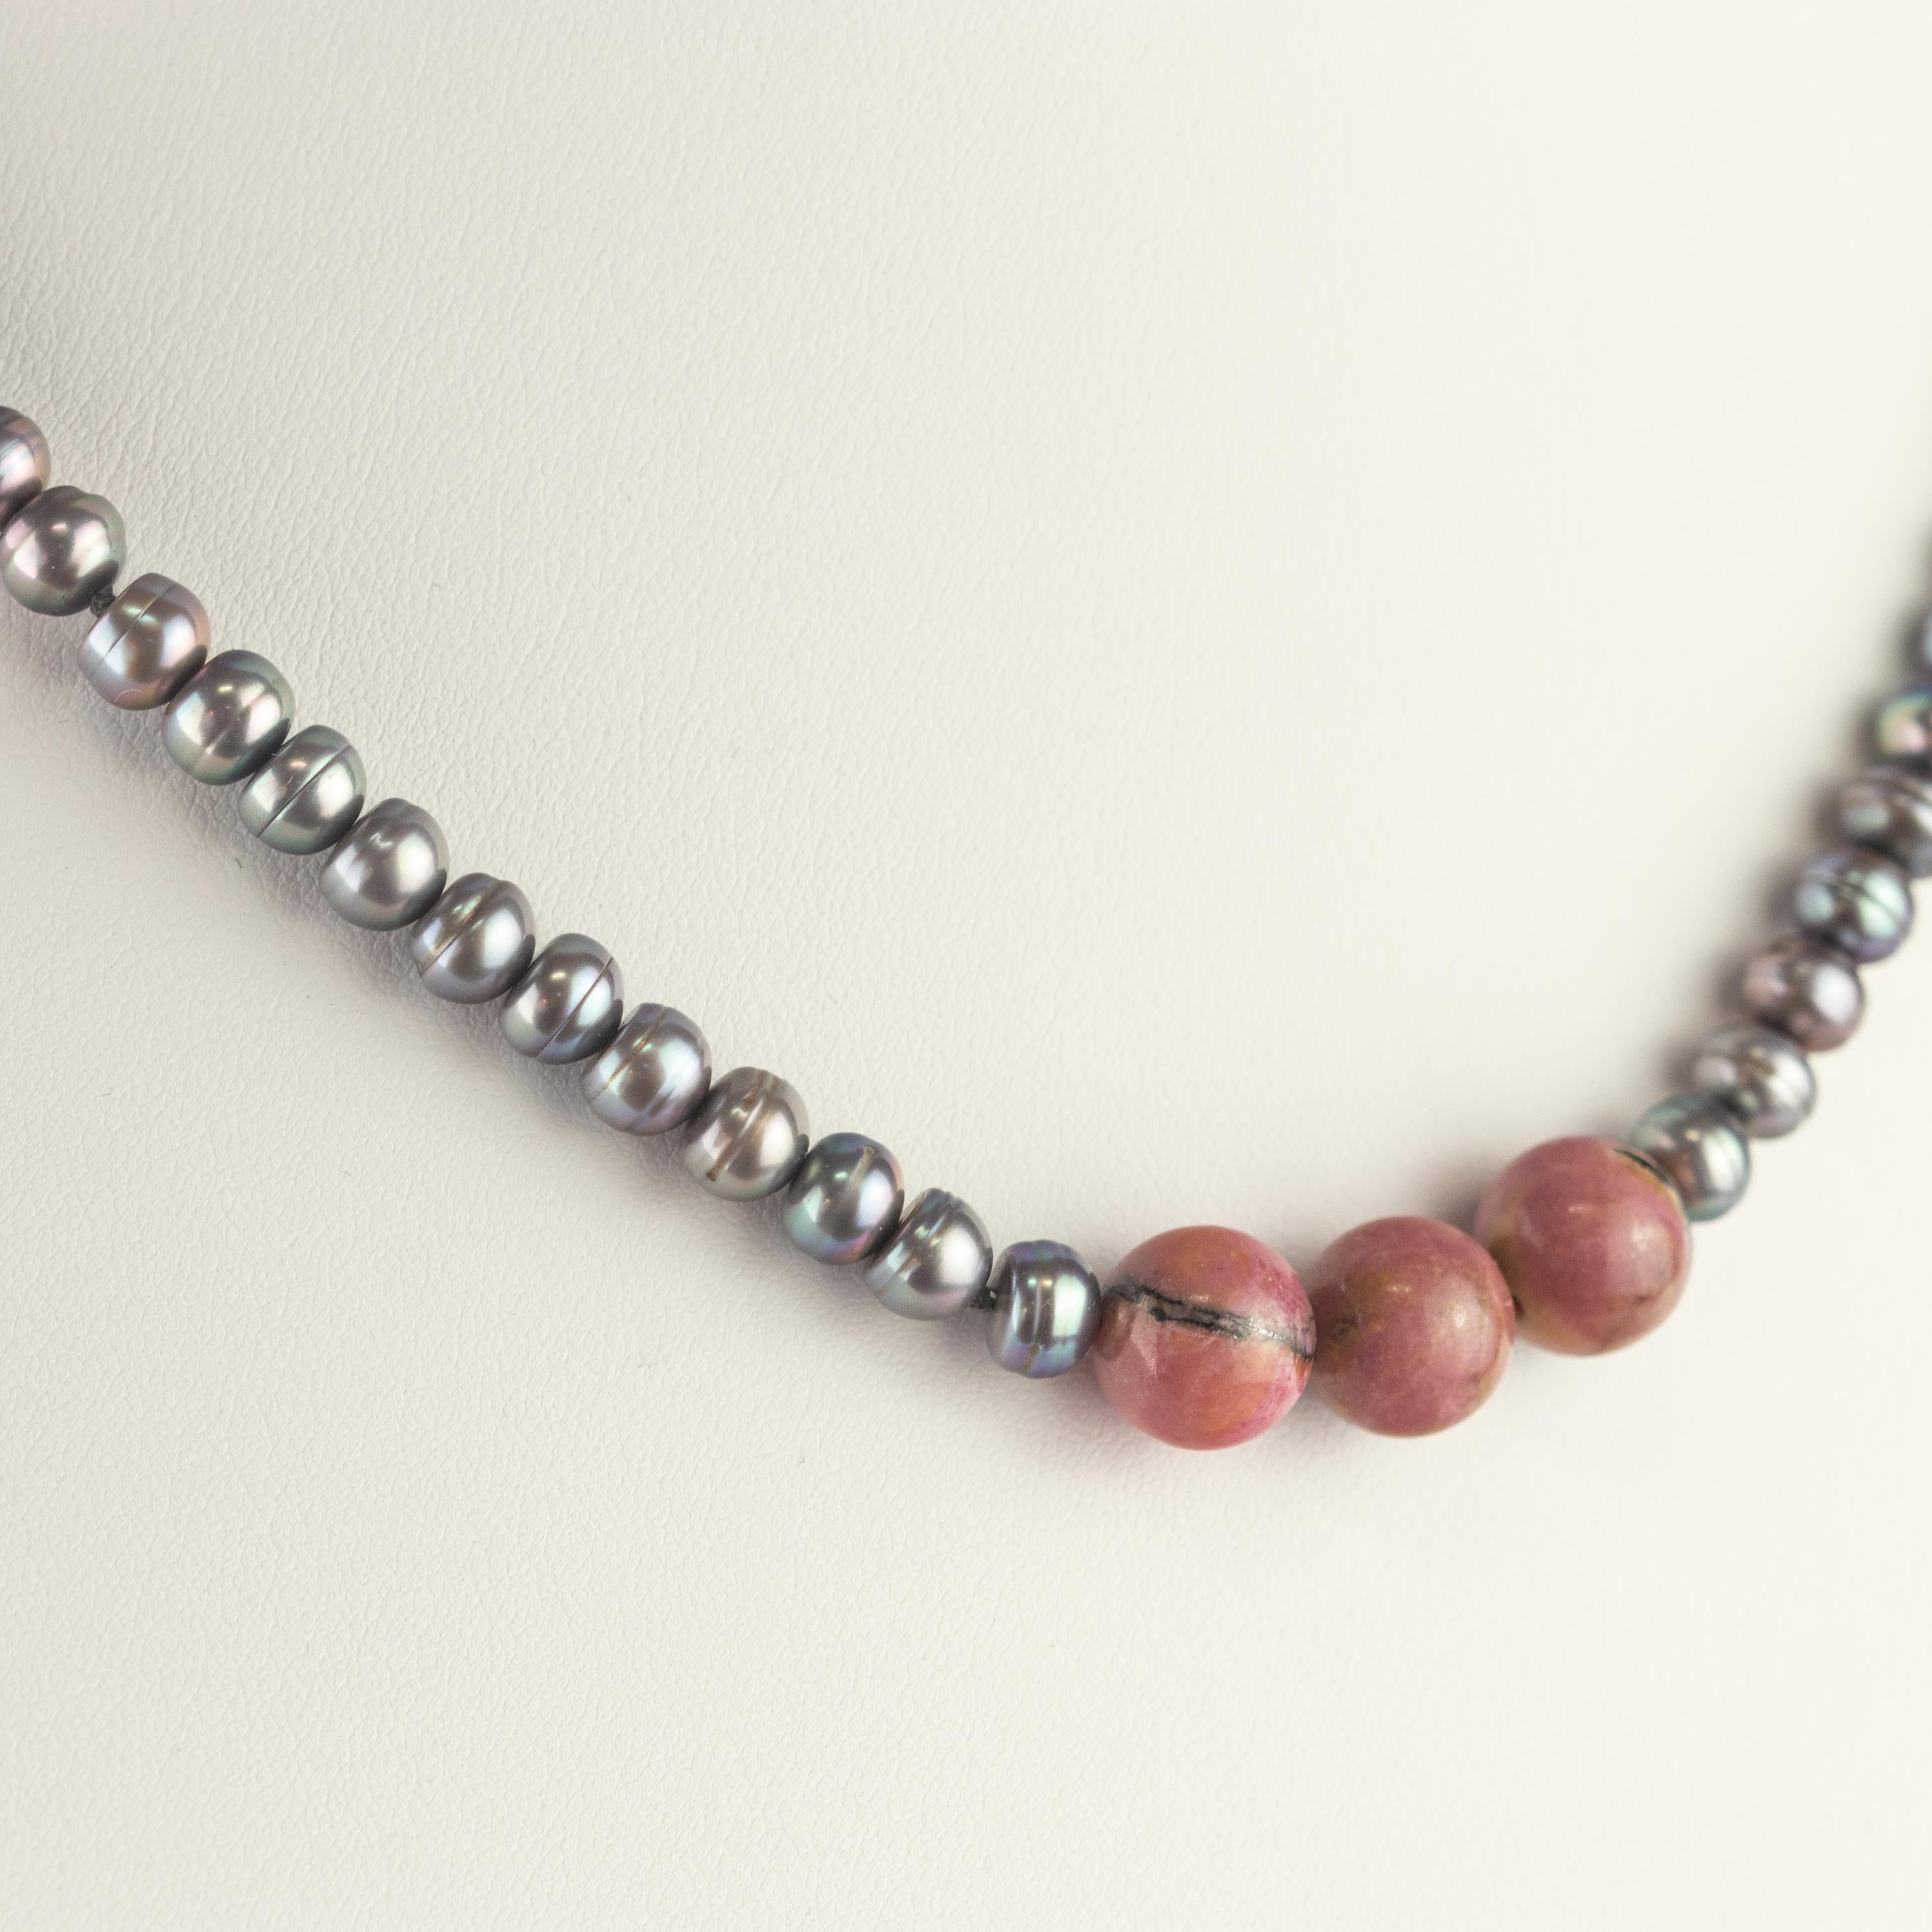 A timeless design meets charming rhodonite. Top quality materials for a Made in Italy iconic necklace. First class freshwater pearls with an elegant closure in 18k yellow gold.

Pearls are thought to offer the power of protection, luck, money and